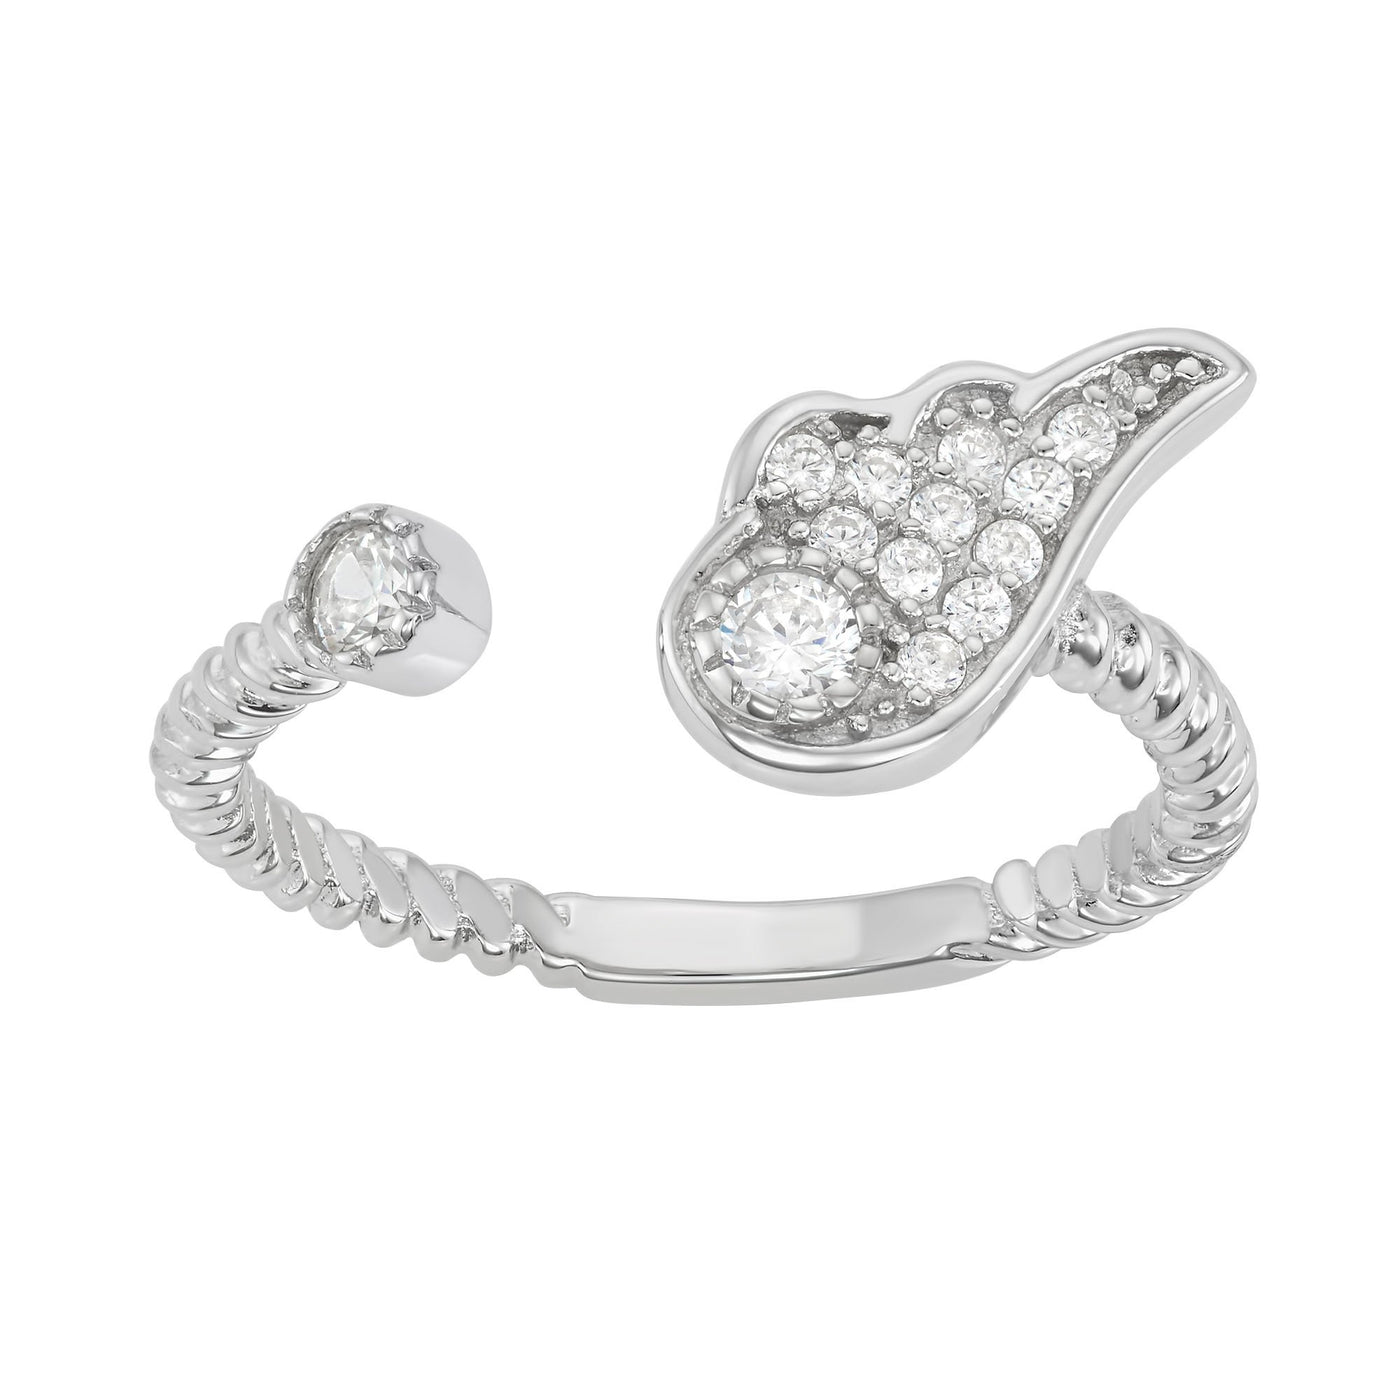 Sterling Silver Angel Wing and Circle Ring With CZ Stones